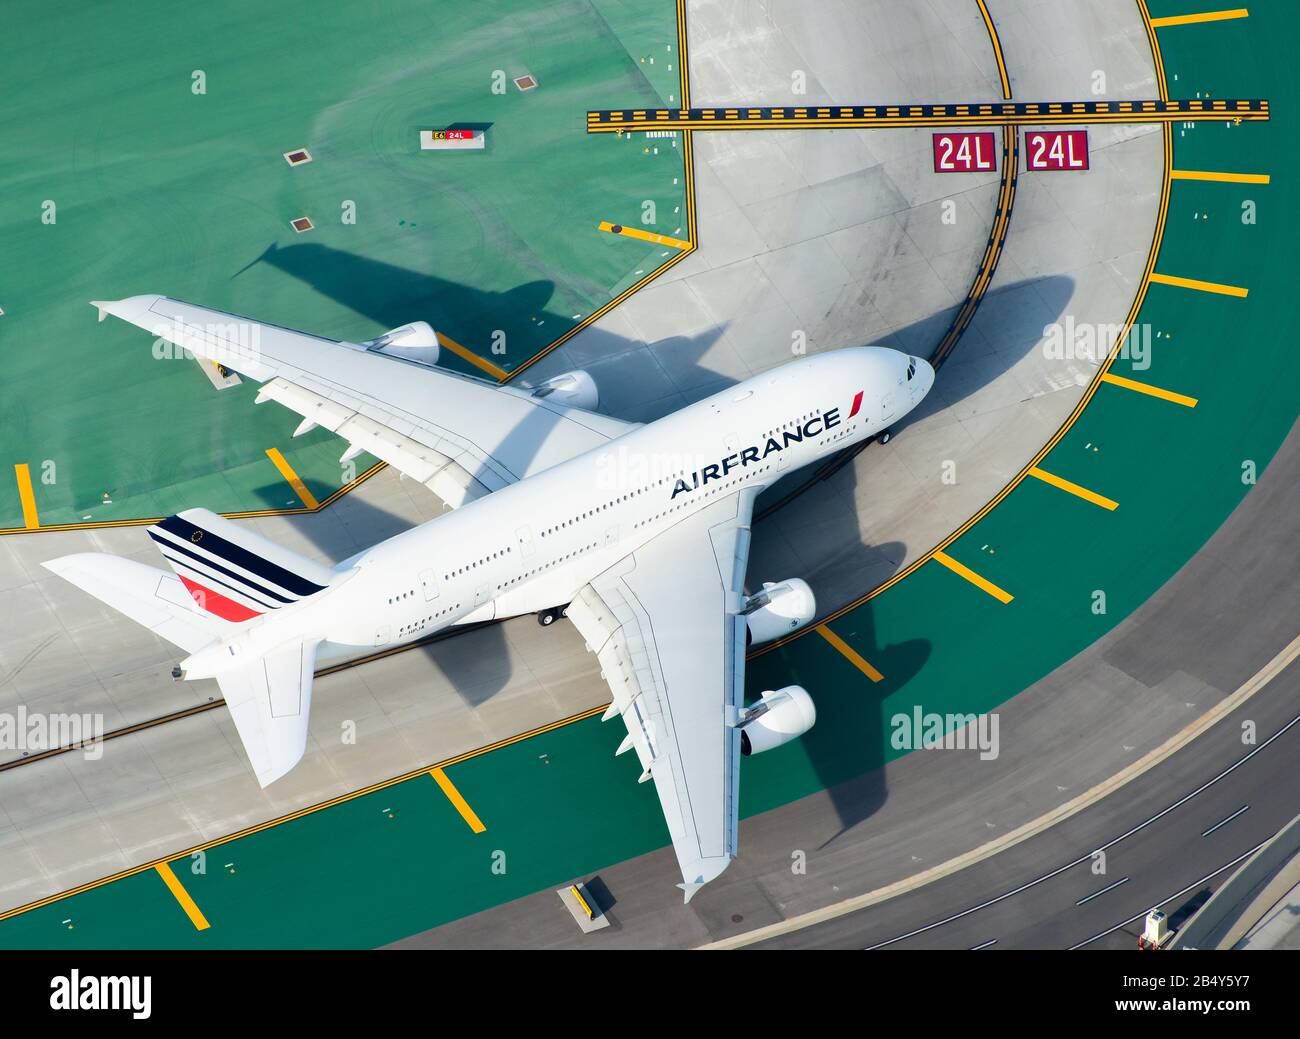 Aerial view of Air France Airbus A380-800 registered as F-HPJA with international airport colorful taxiway marks and lines. Aircraft entering runway. Stock Photo